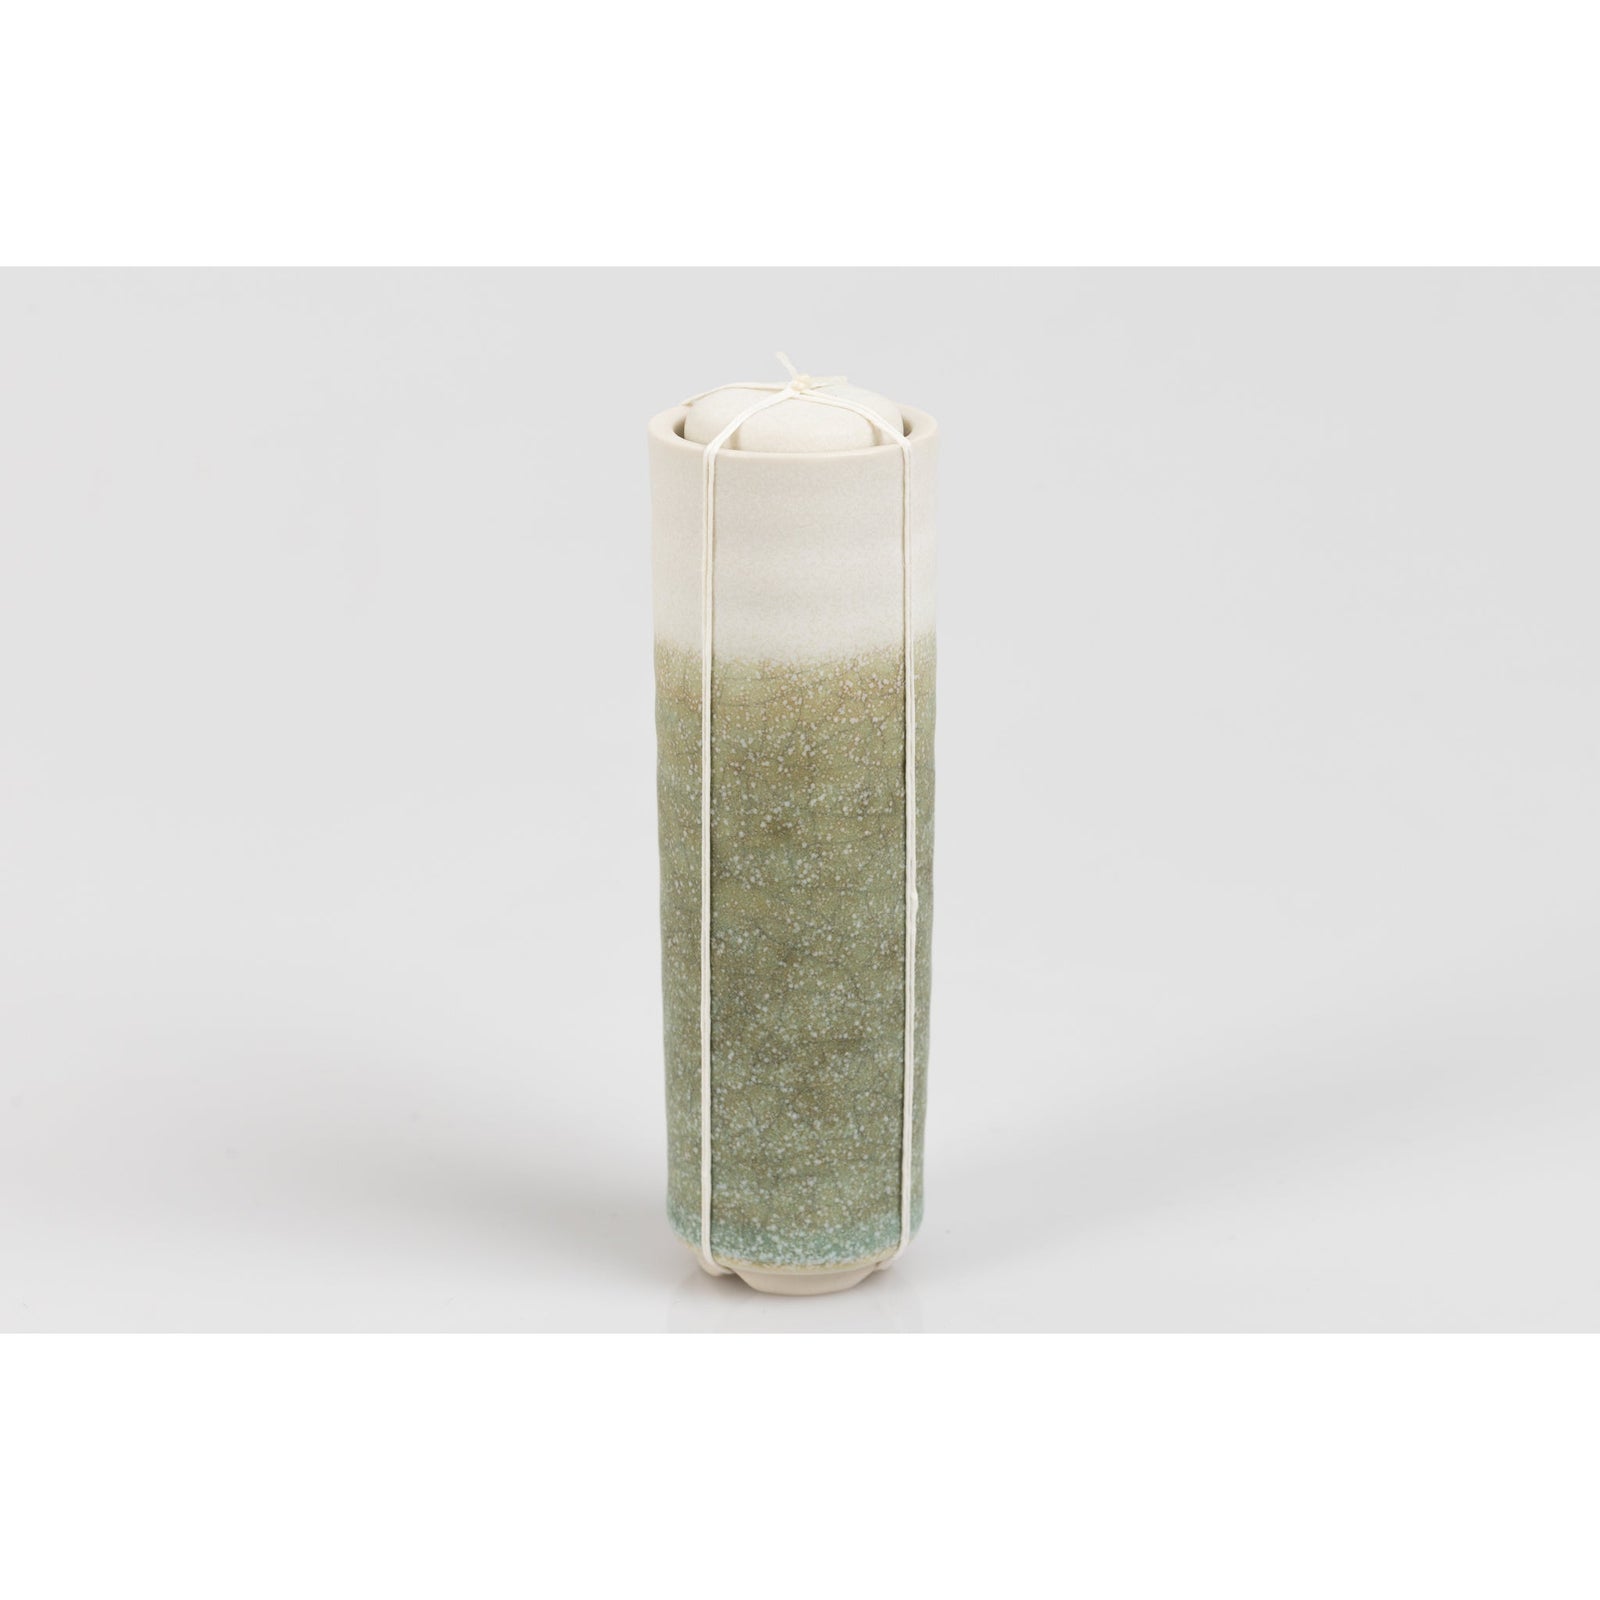 KSJ3 Bound Stoneware Container by Kate Schuricht, available at Padstow Gallery, Cornwall